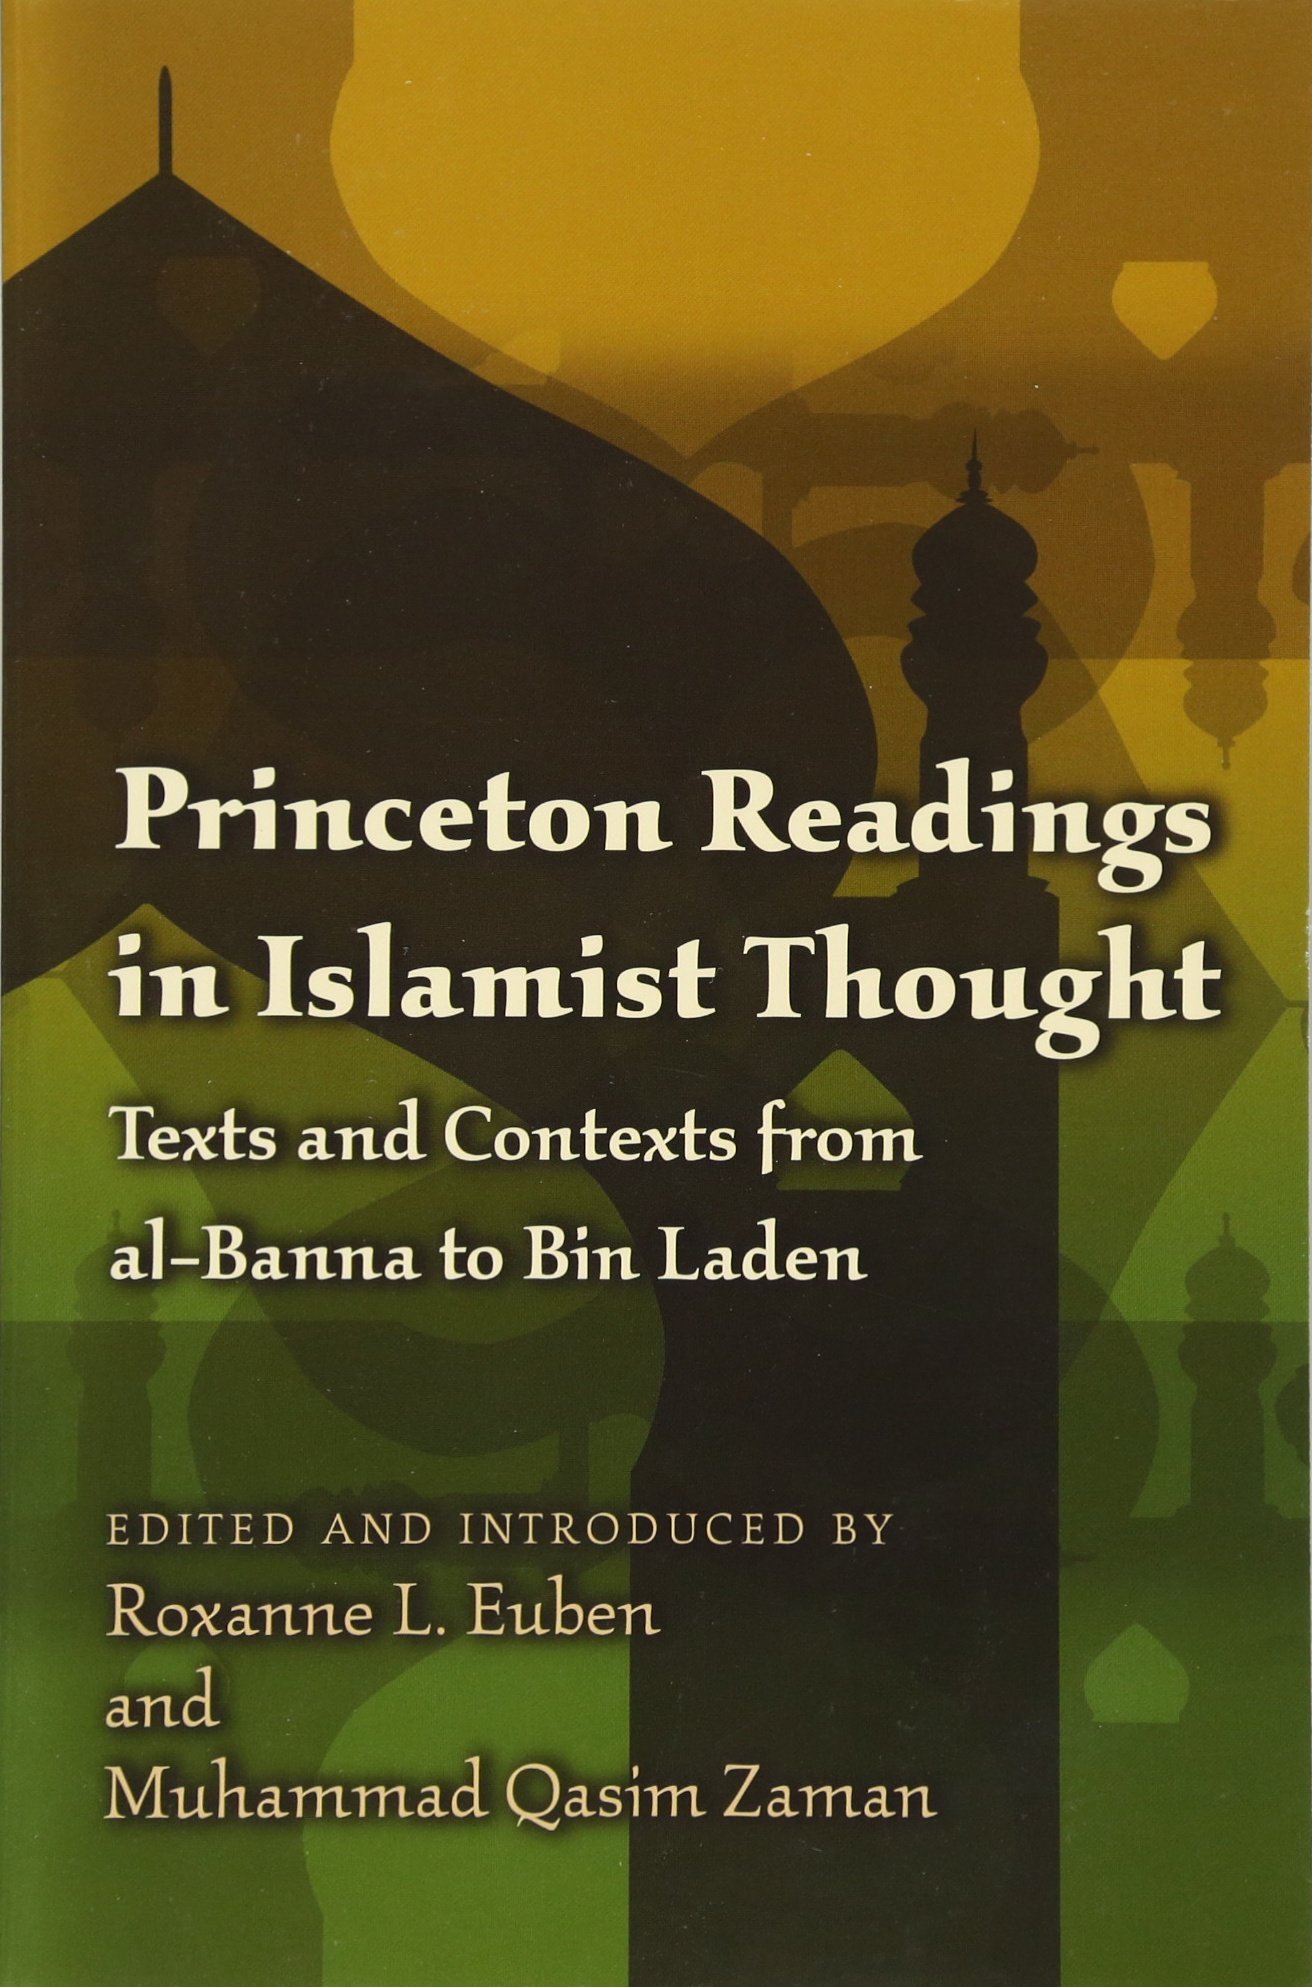 Book Cover Princeton Readings in Islamist Thought: Texts and Contexts from al-Banna to Bin Laden (Princeton Studies in Muslim Politics, 35)